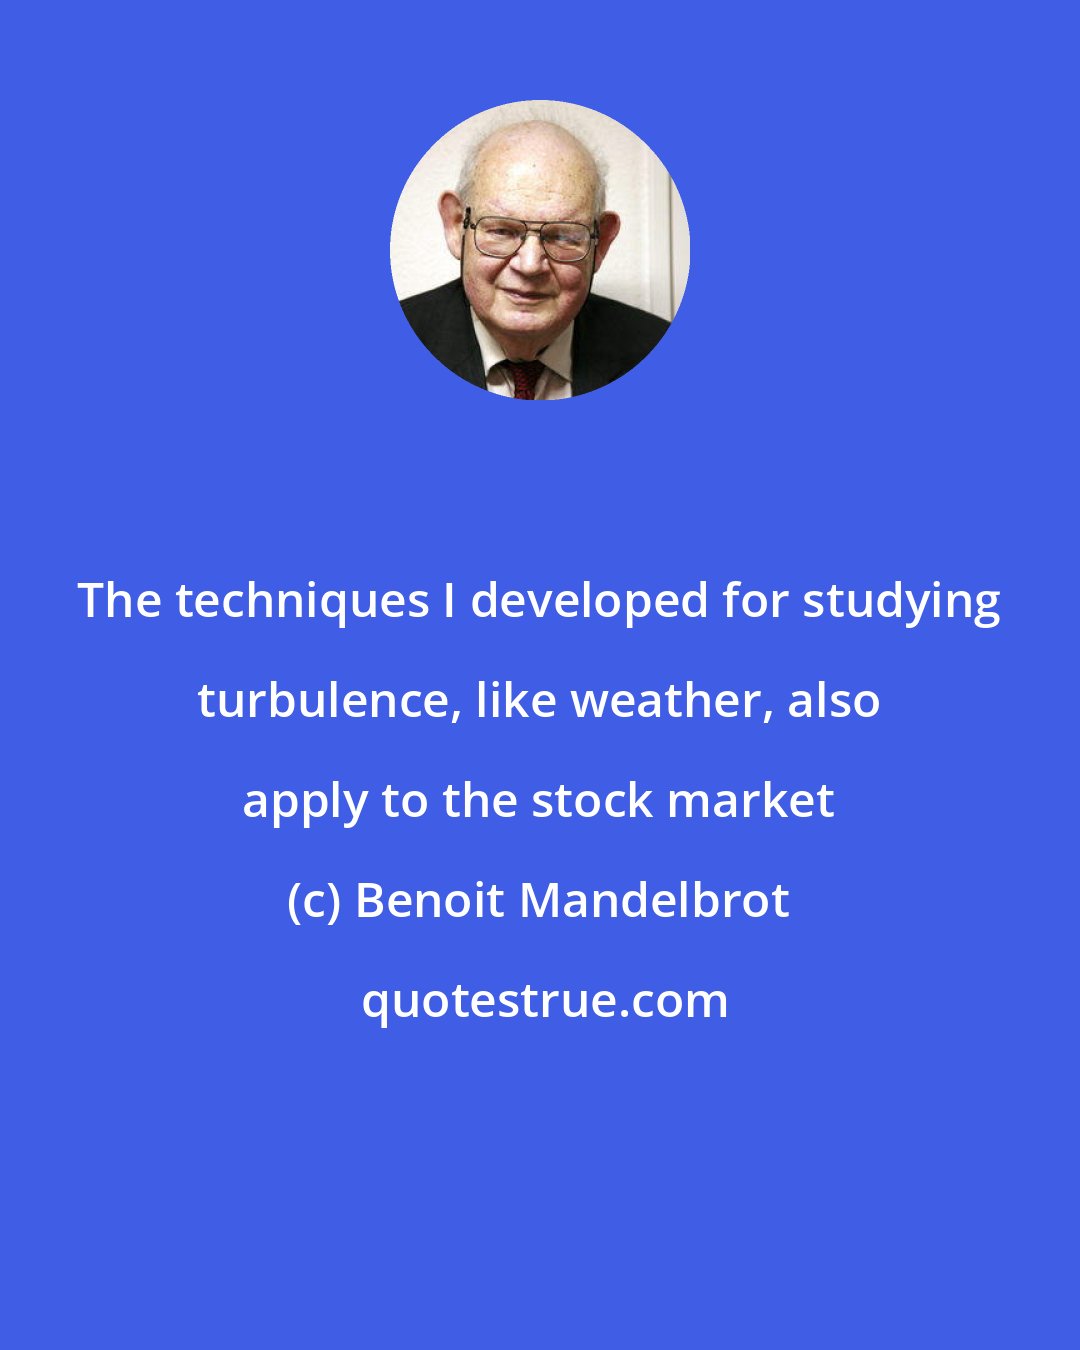 Benoit Mandelbrot: The techniques I developed for studying turbulence, like weather, also apply to the stock market